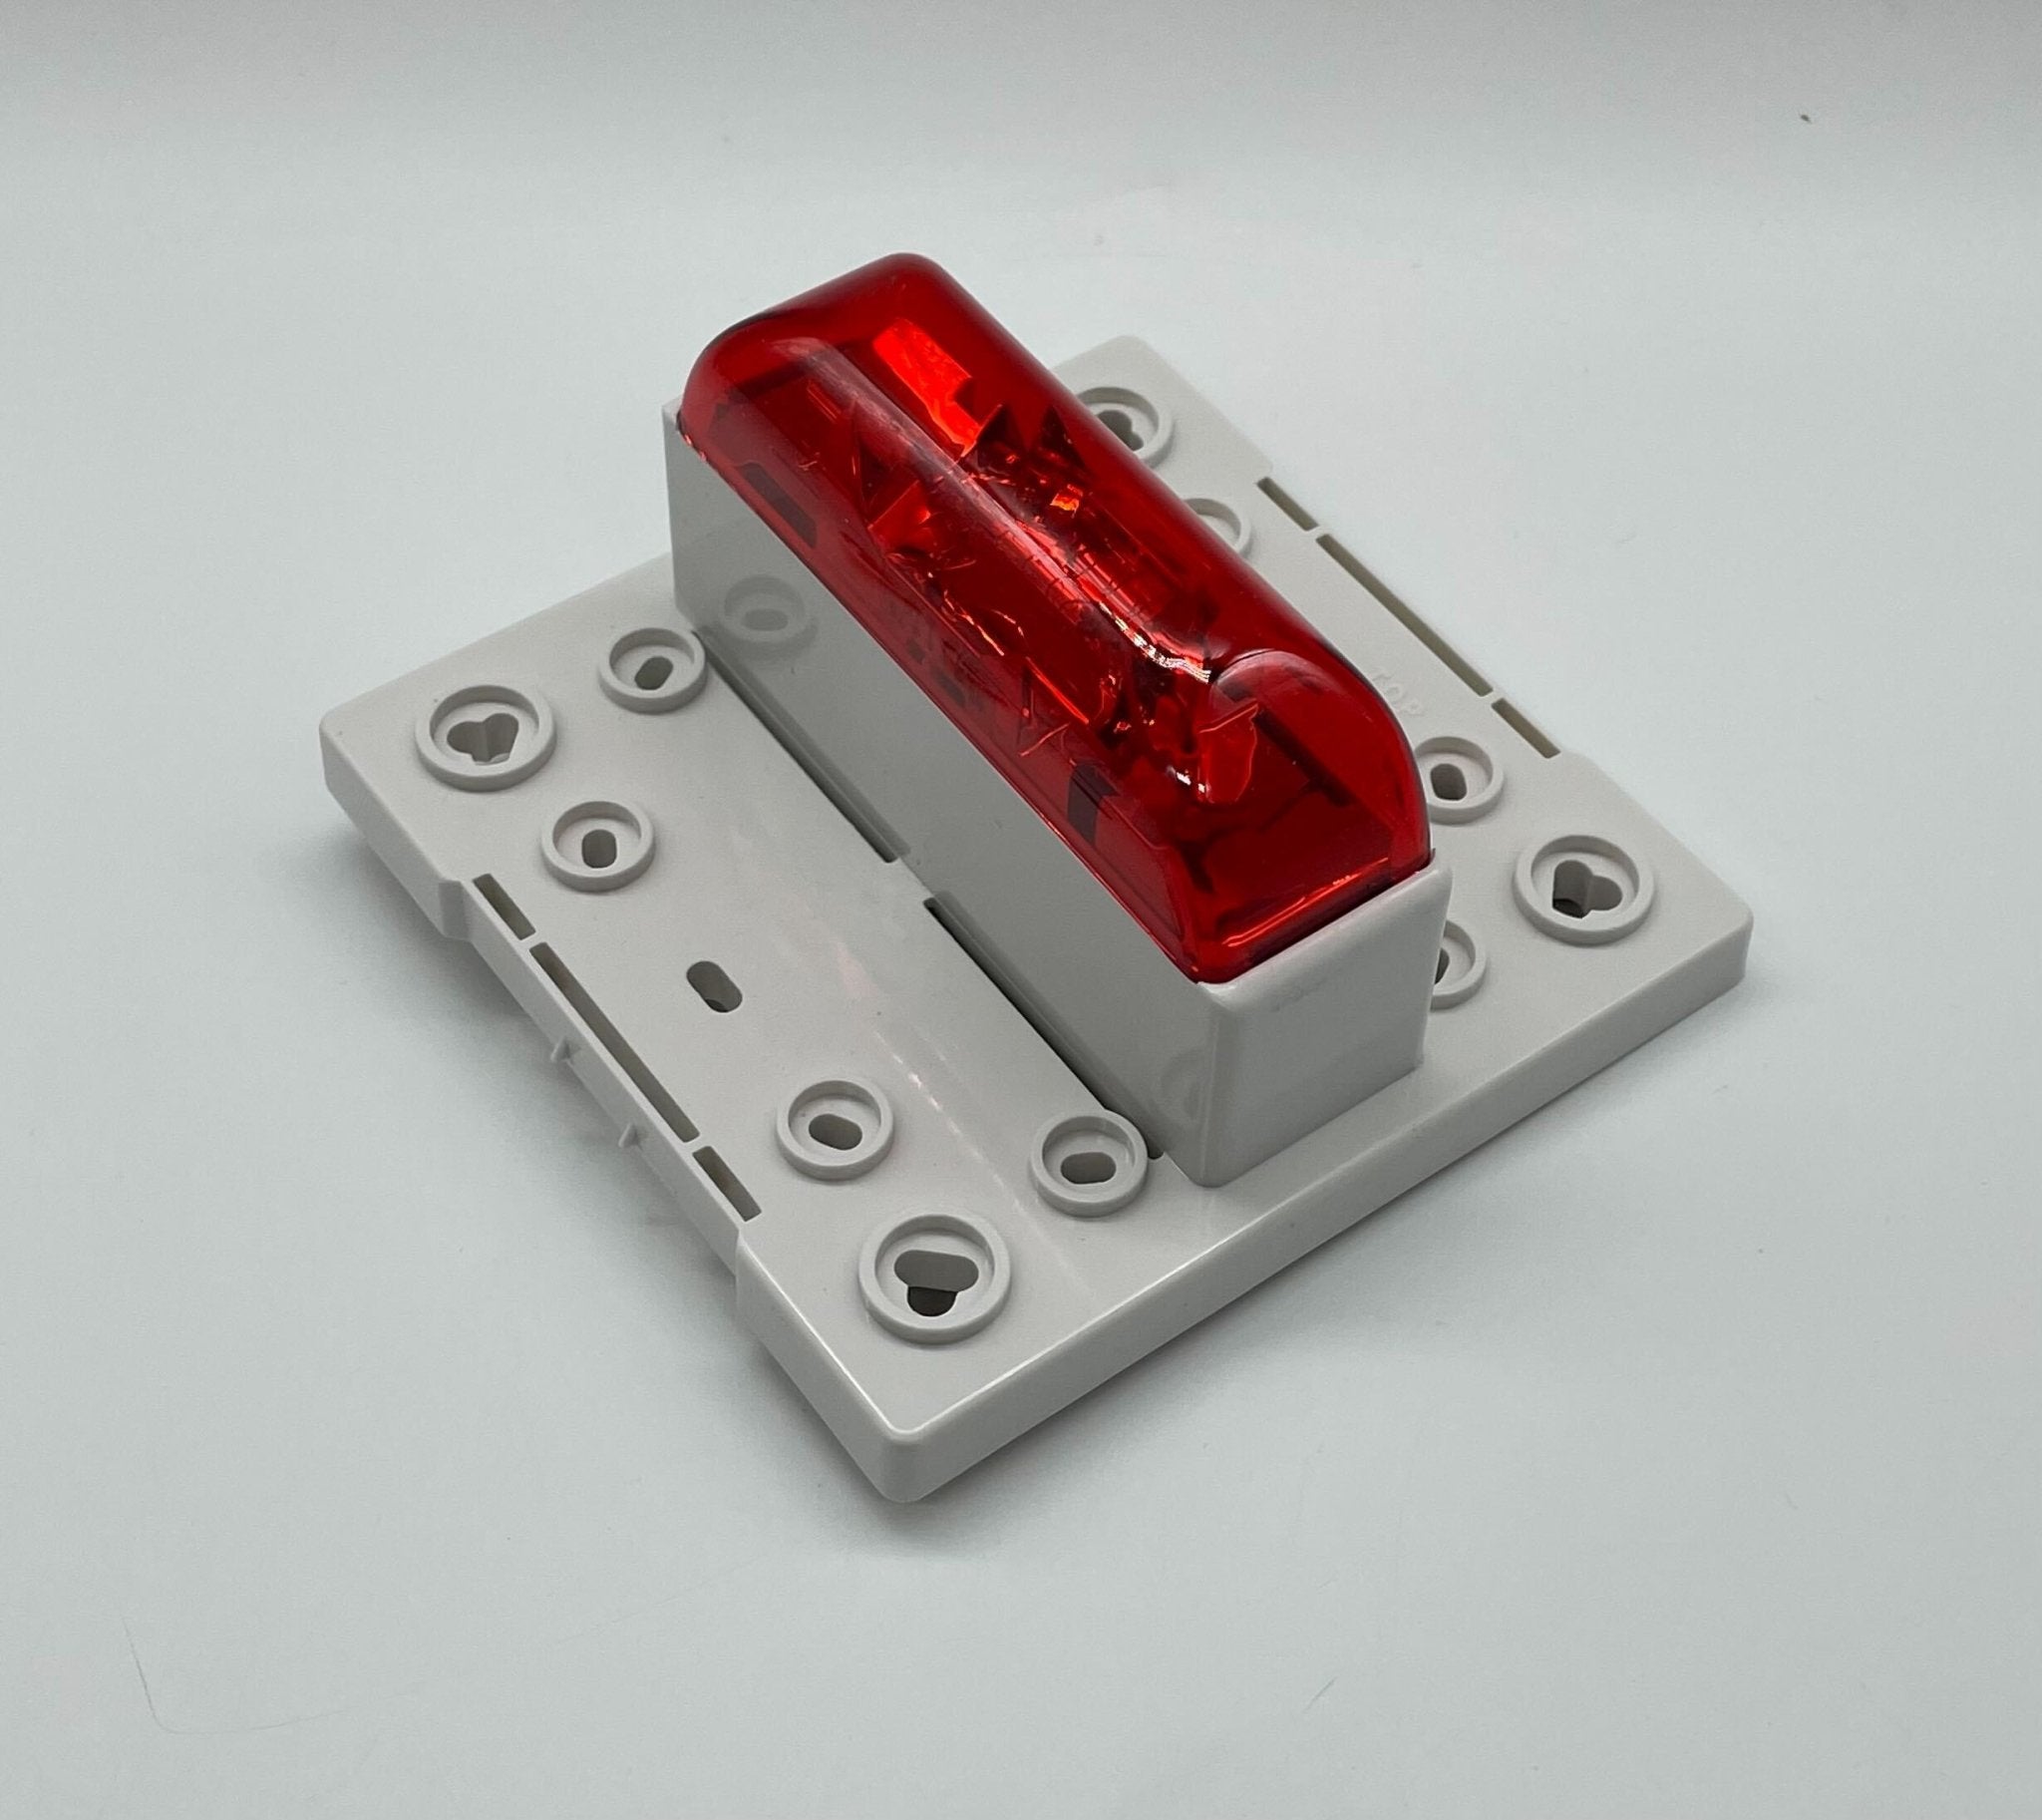 Wheelock RSSR-24MCC-NW - The Fire Alarm Supplier